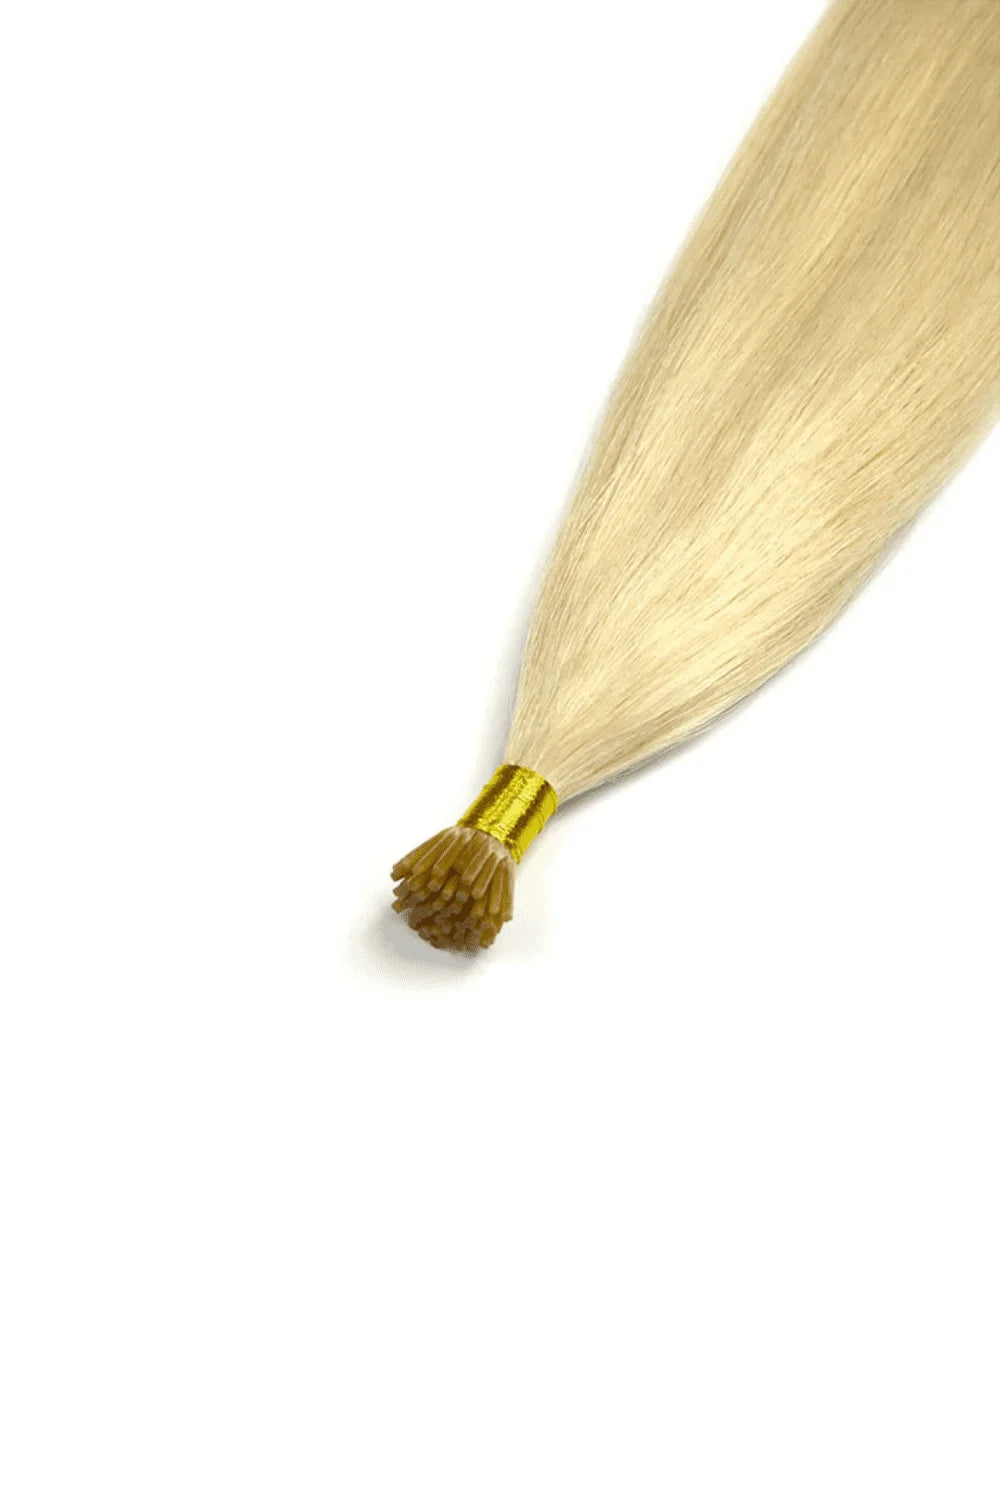 i-tips hair extension application method image